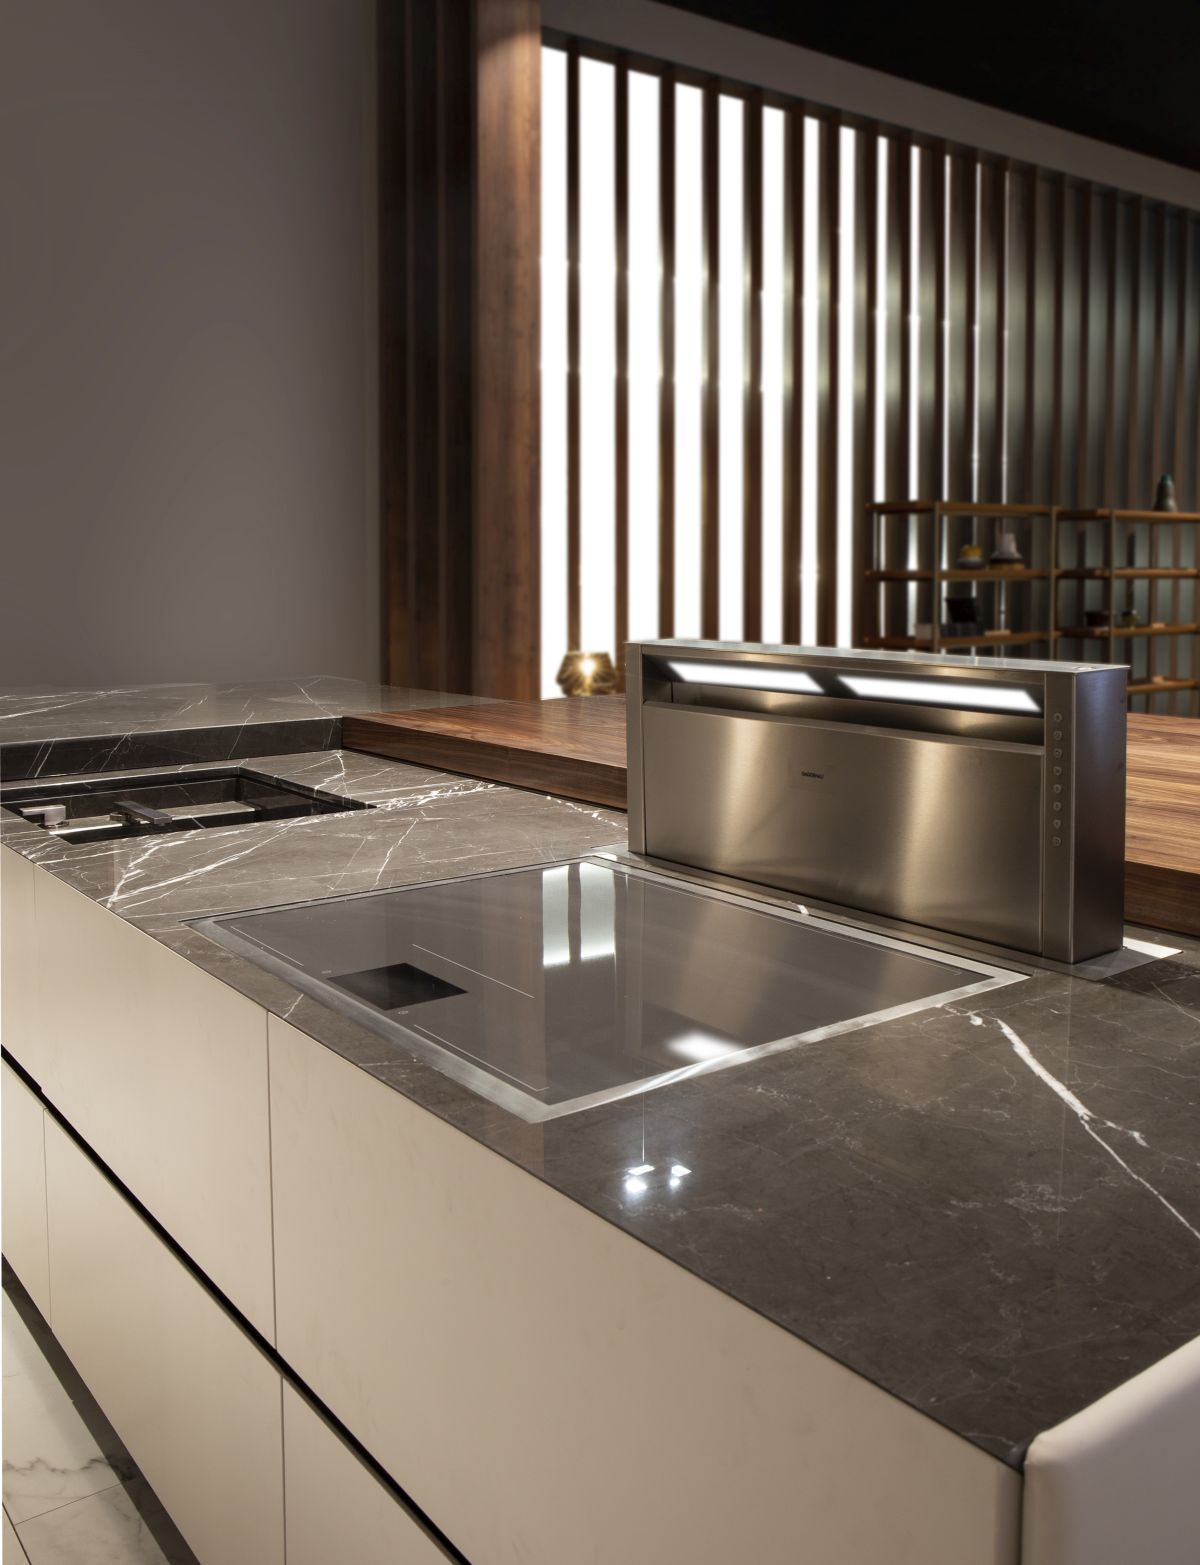 This luxury kitchen also includes a variety of other exquisite details and features designed to enrich the user experience